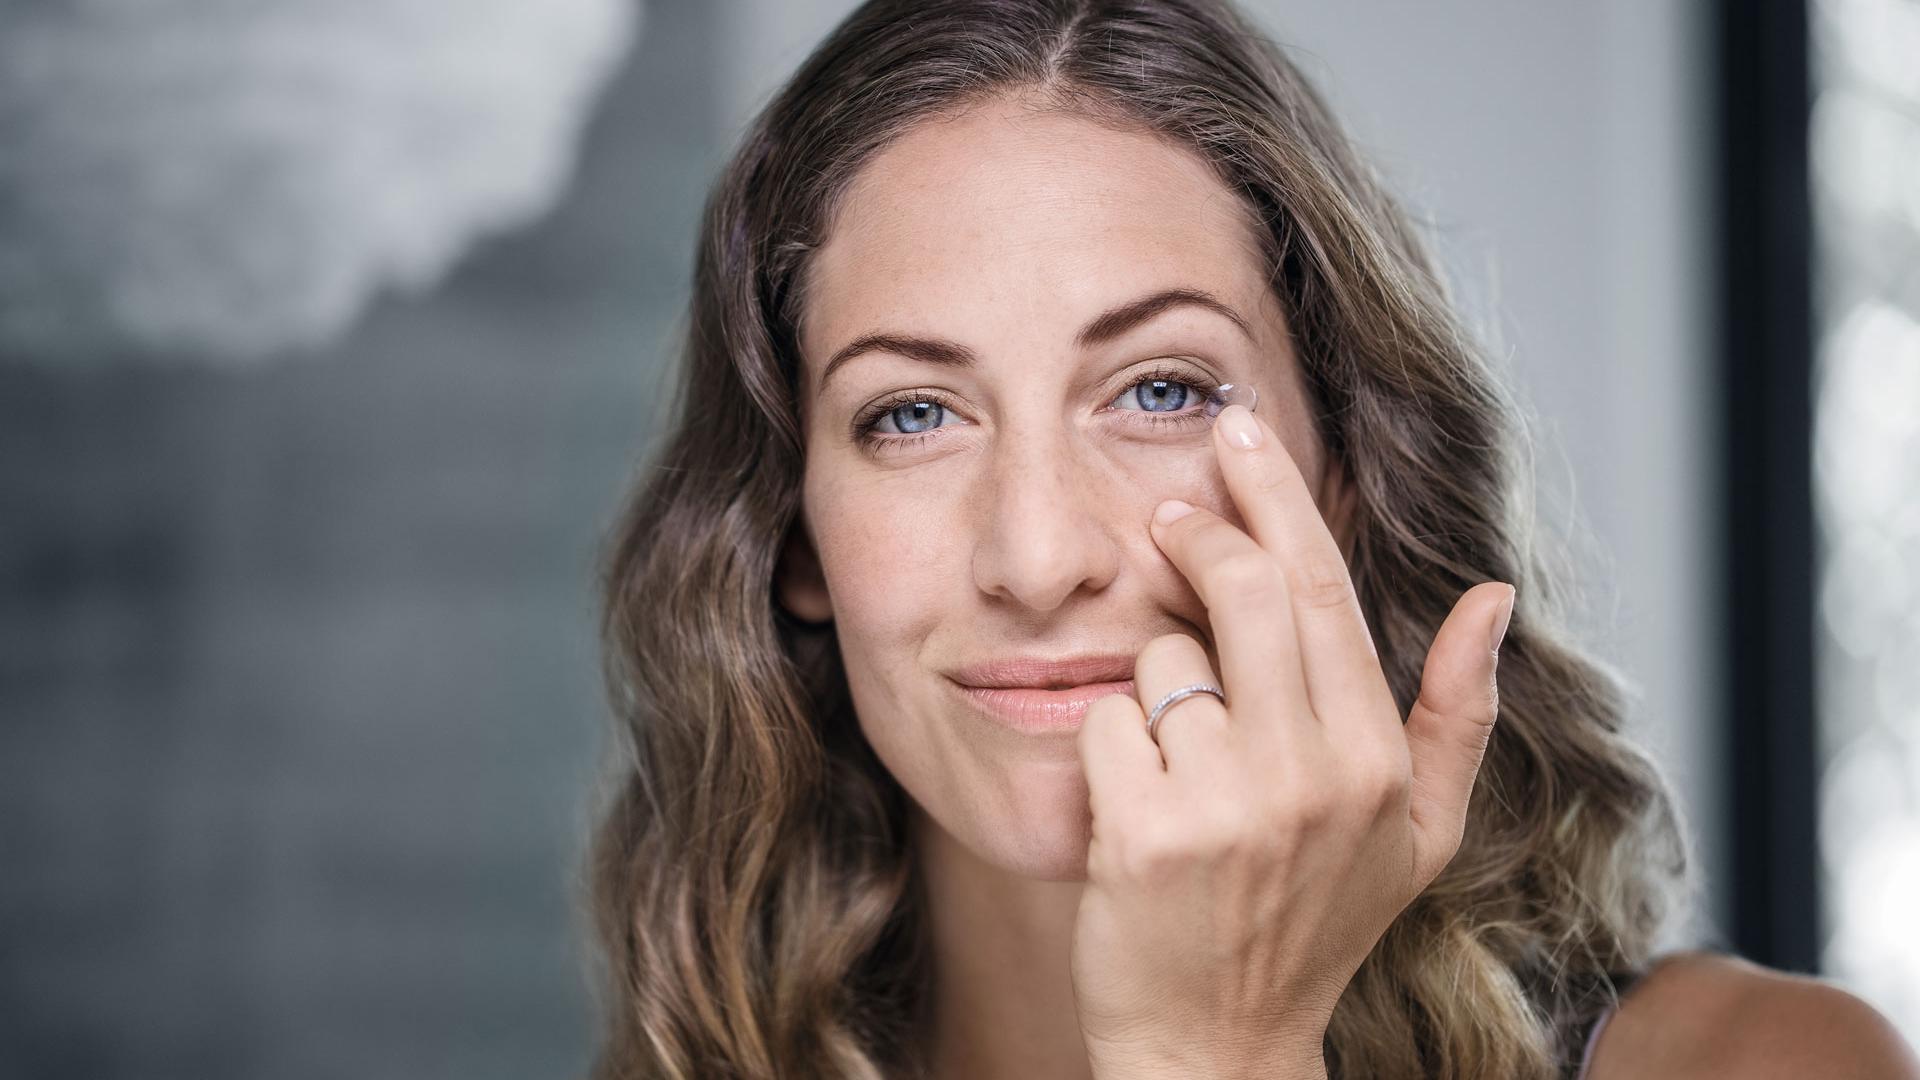 10 tips for wearing contact lenses